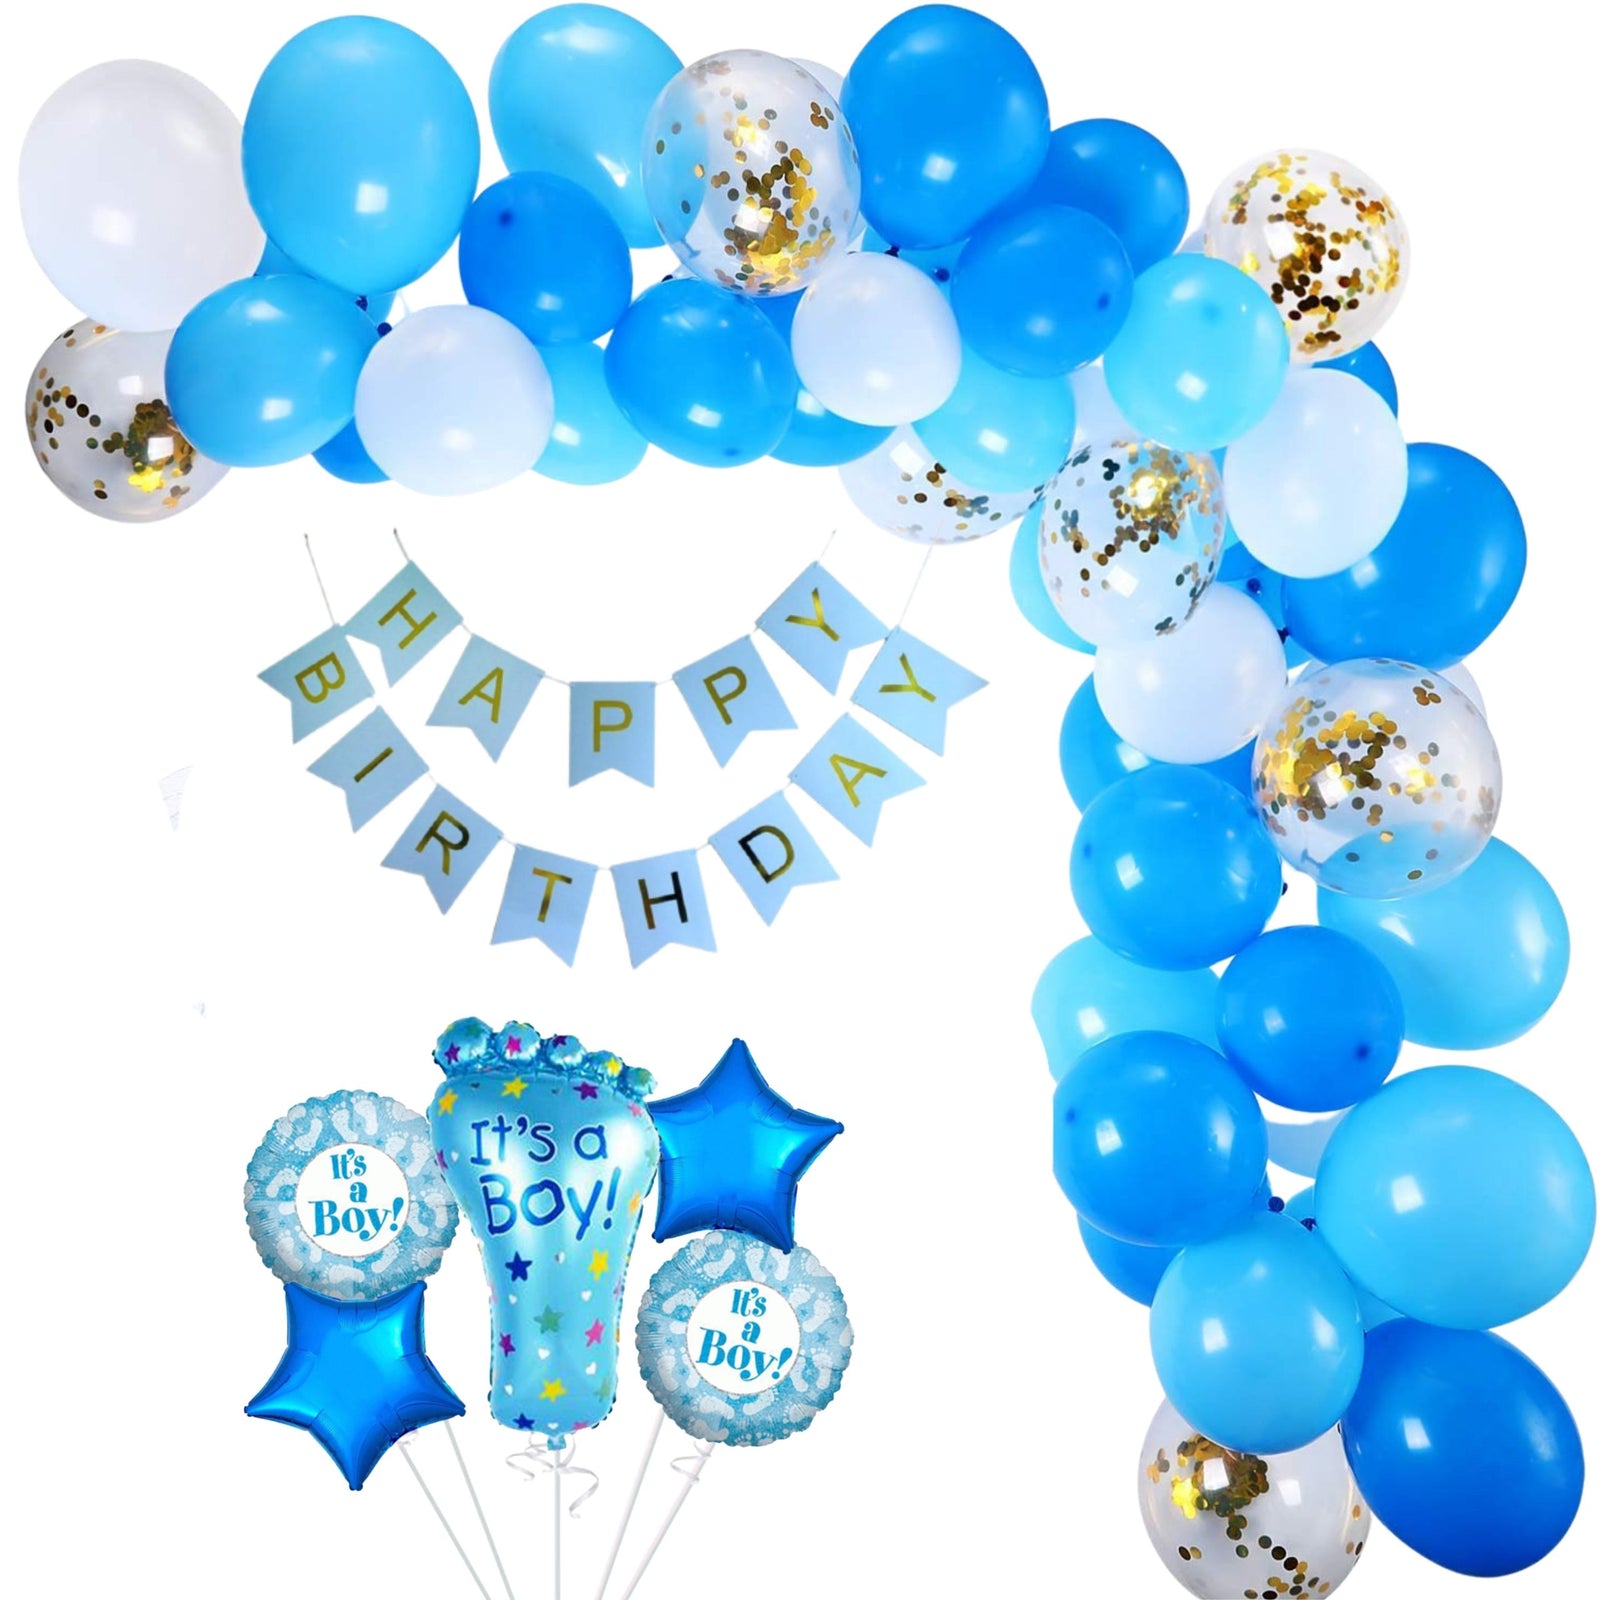 Birthday Decoration kit for 1st Birthday Boys-85 Pcs Bday With Blue Banner, Blue Star, Balloons, Foil Balloons, 1st Birthday For Kids